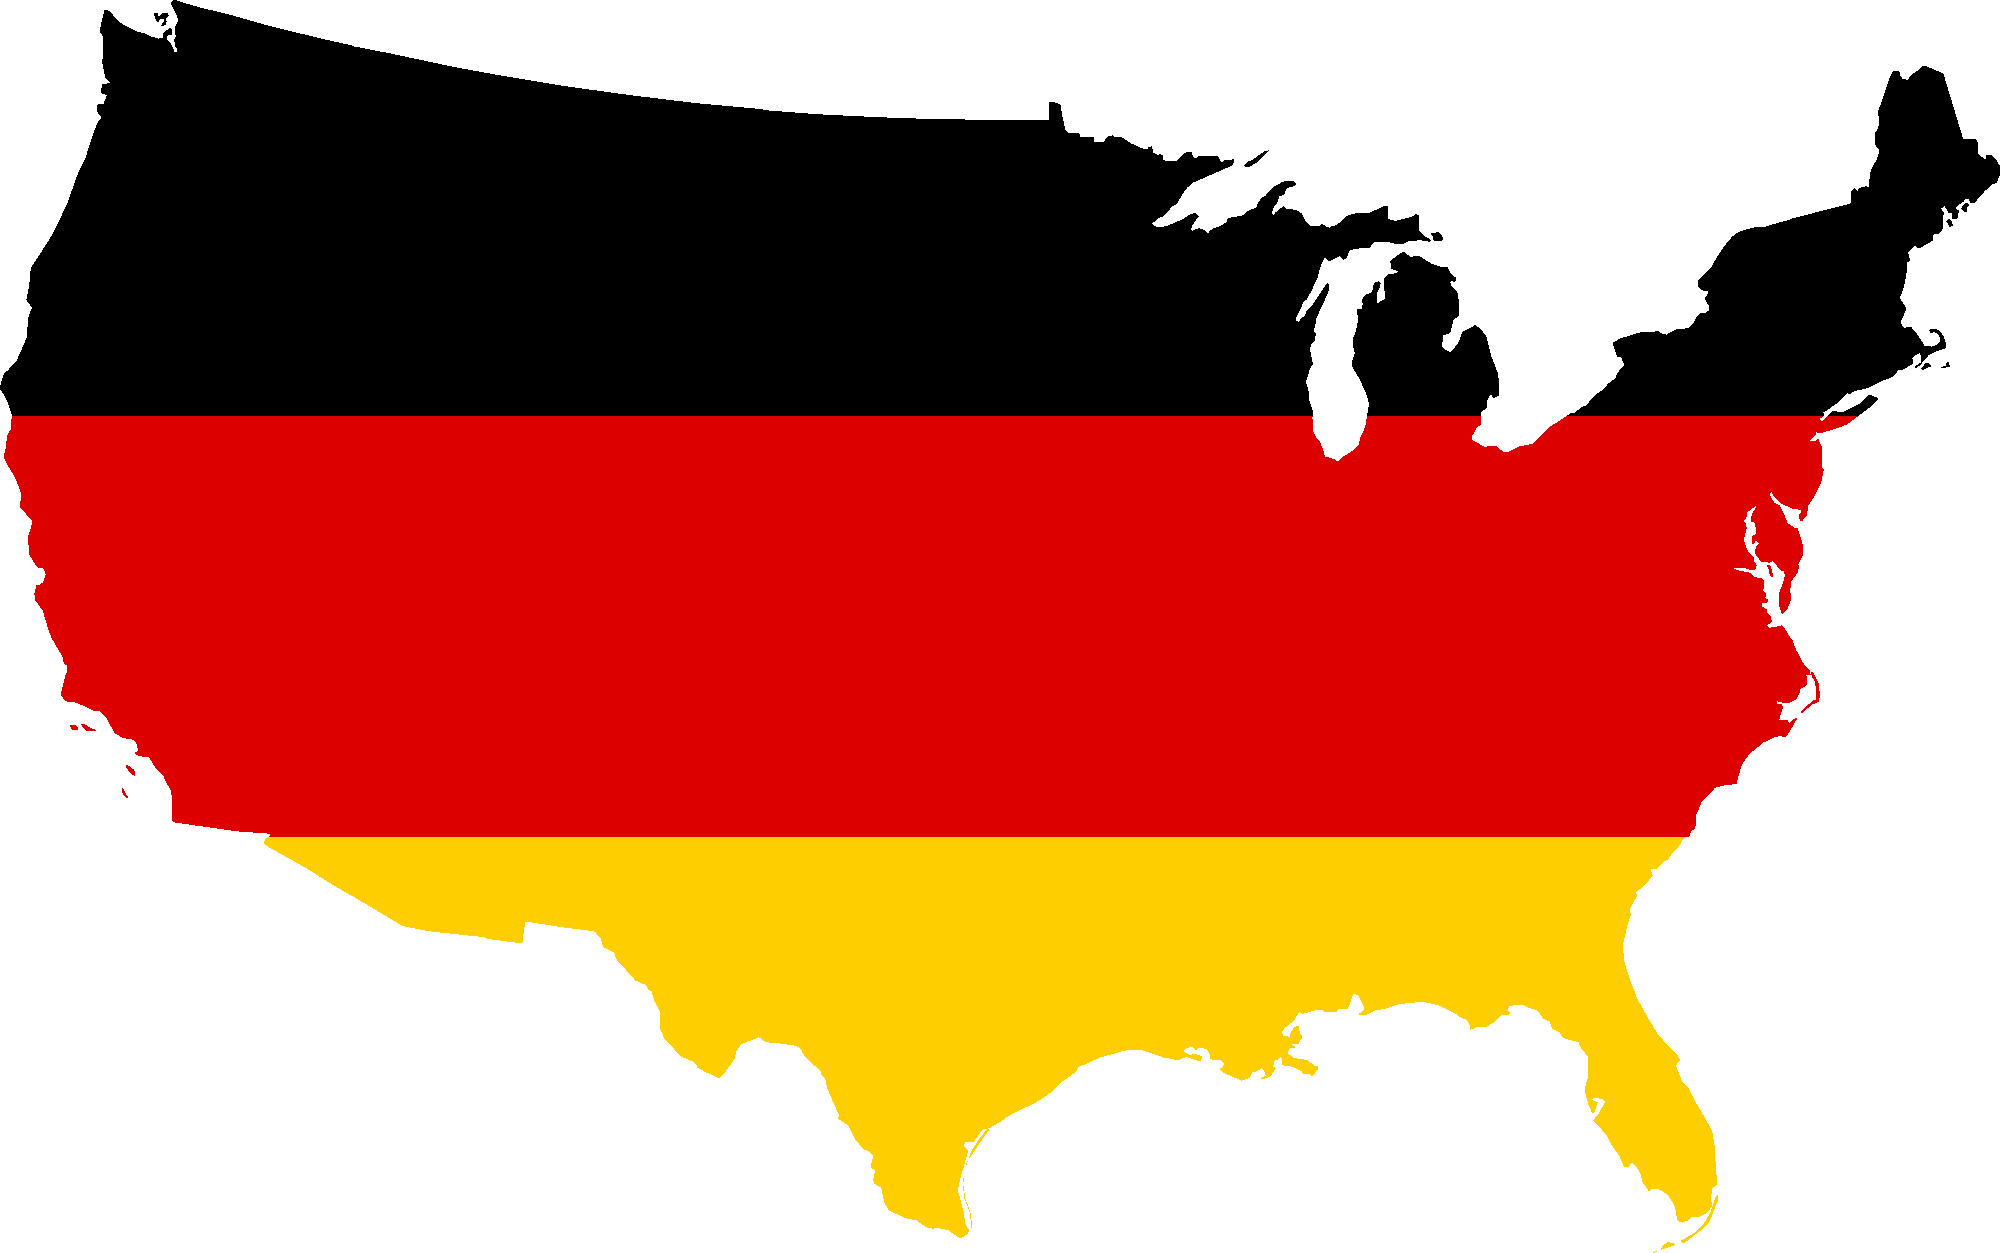 Germany Flag Images - ClipArt Best